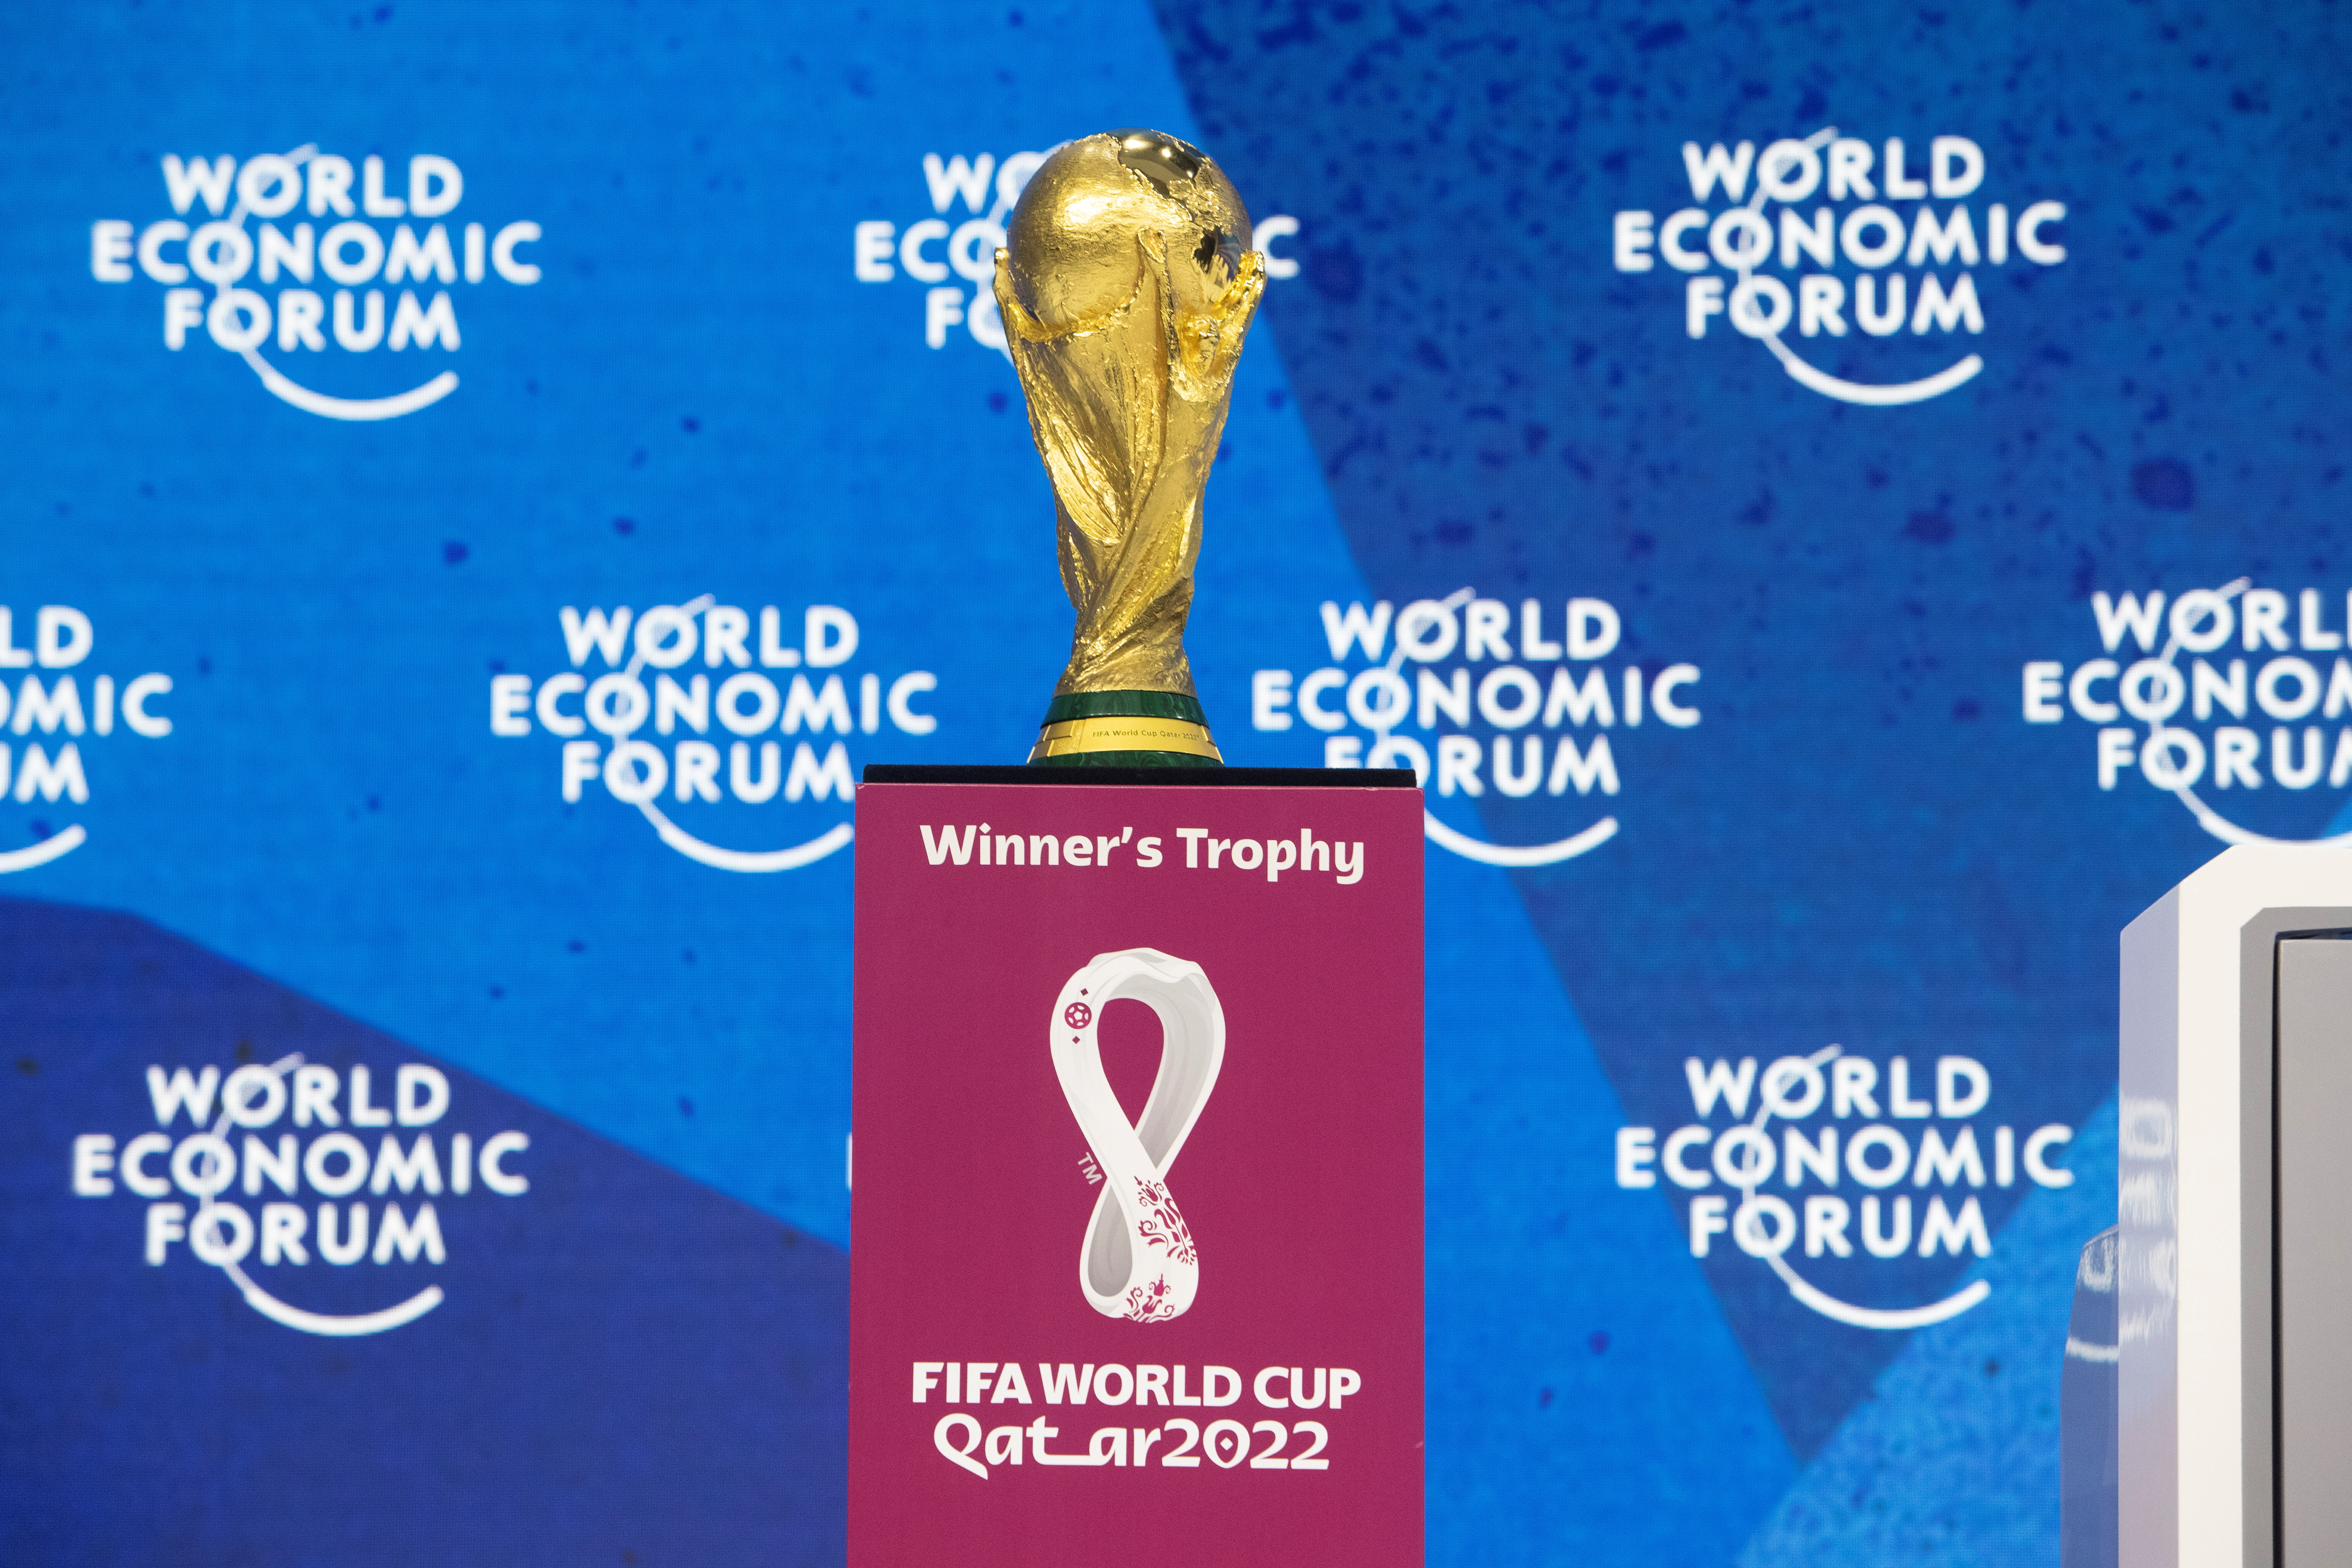 FIFA World Cup trophy is displayed during a panel discussion in Davos